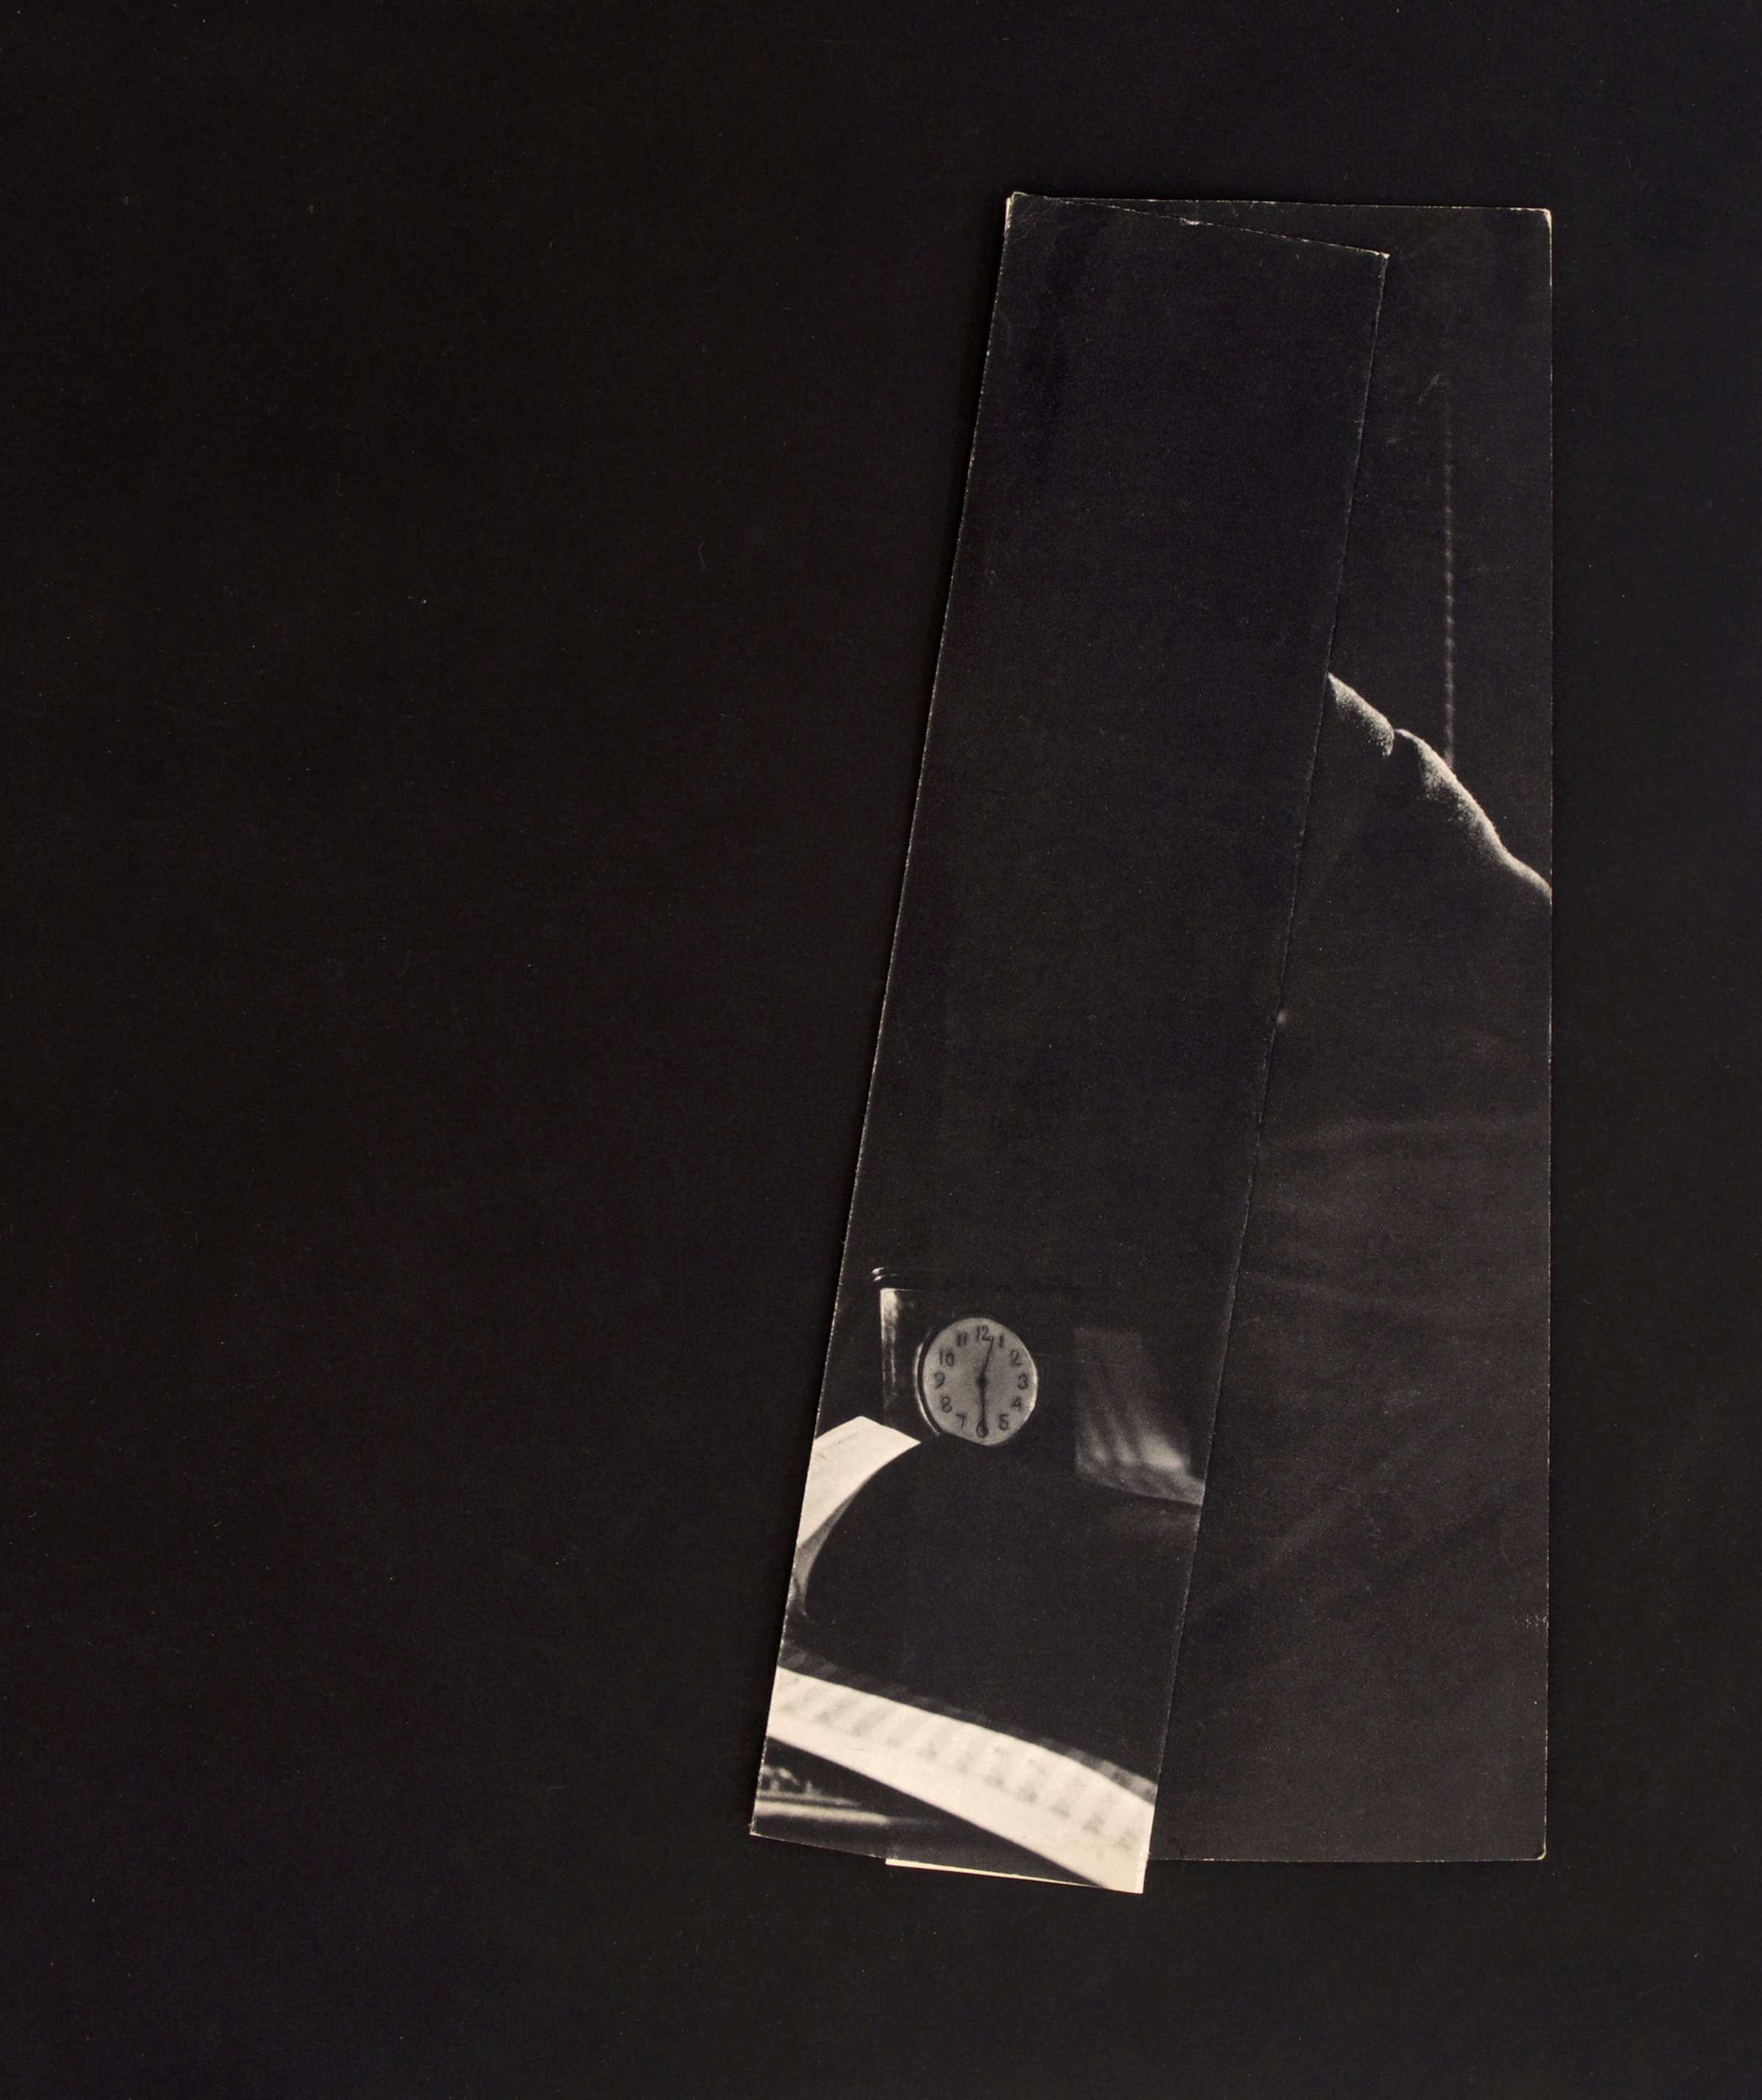   of greatness (s.t.b.)  2020 folded photogravure book page, frame 17.75 x 15 inches   